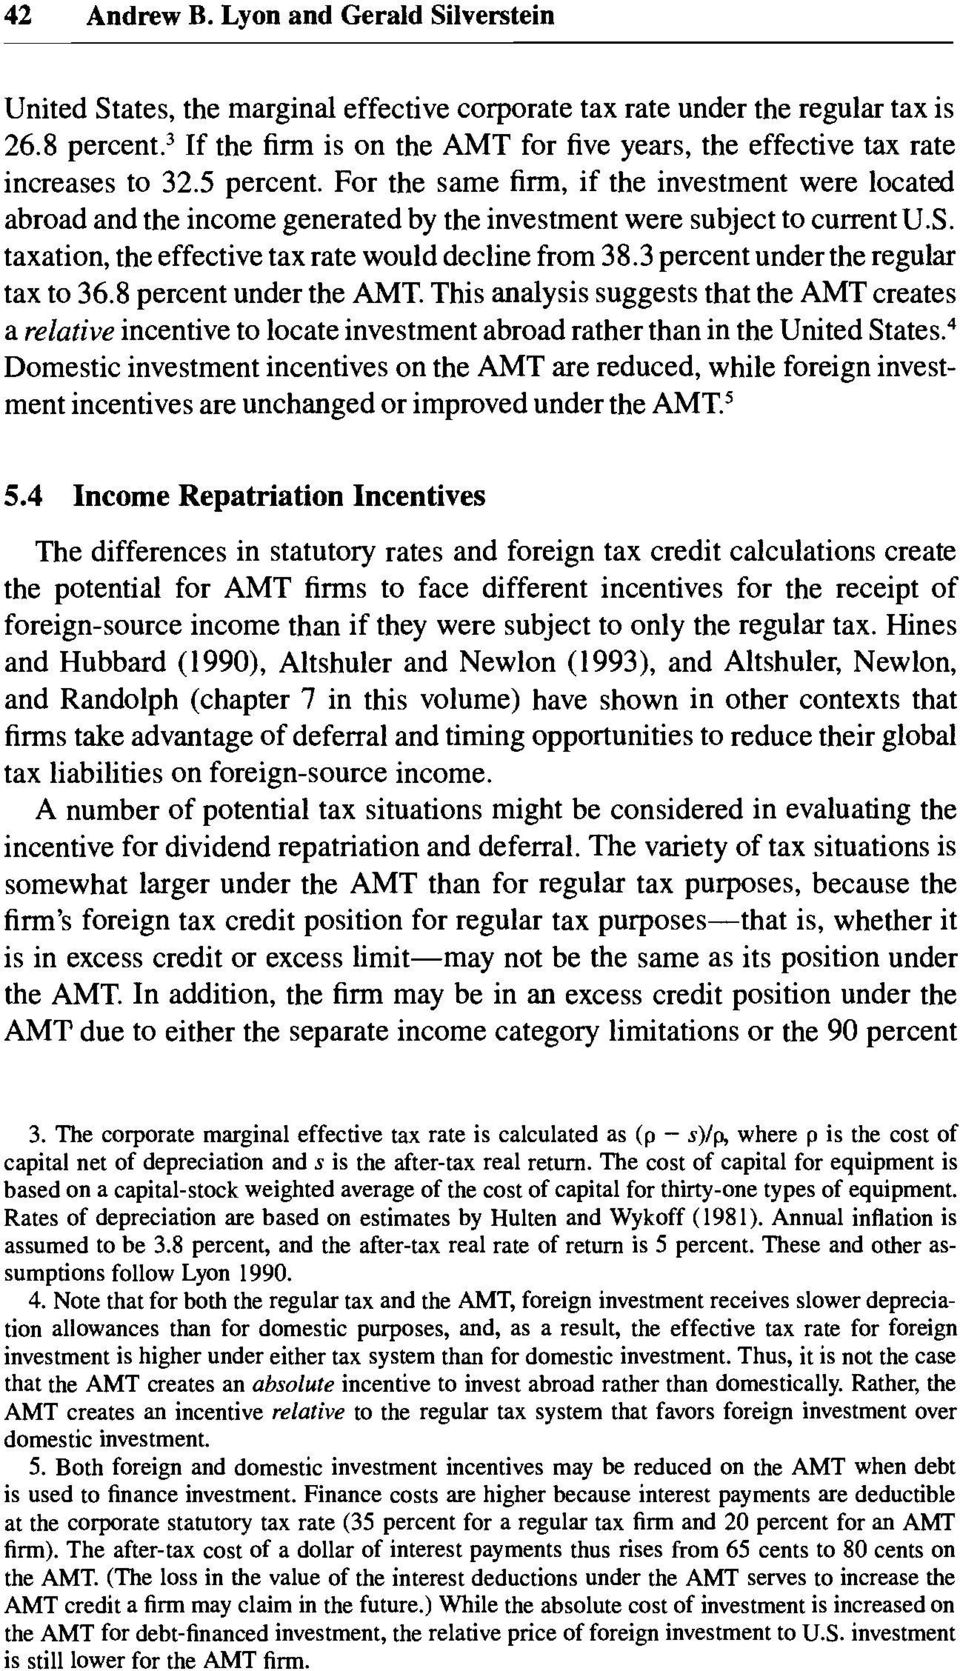 For the same firm, if the investment were located abroad and the income generated by the investment were subject to current U.S. taxation, the effective tax rate would decline from 38.